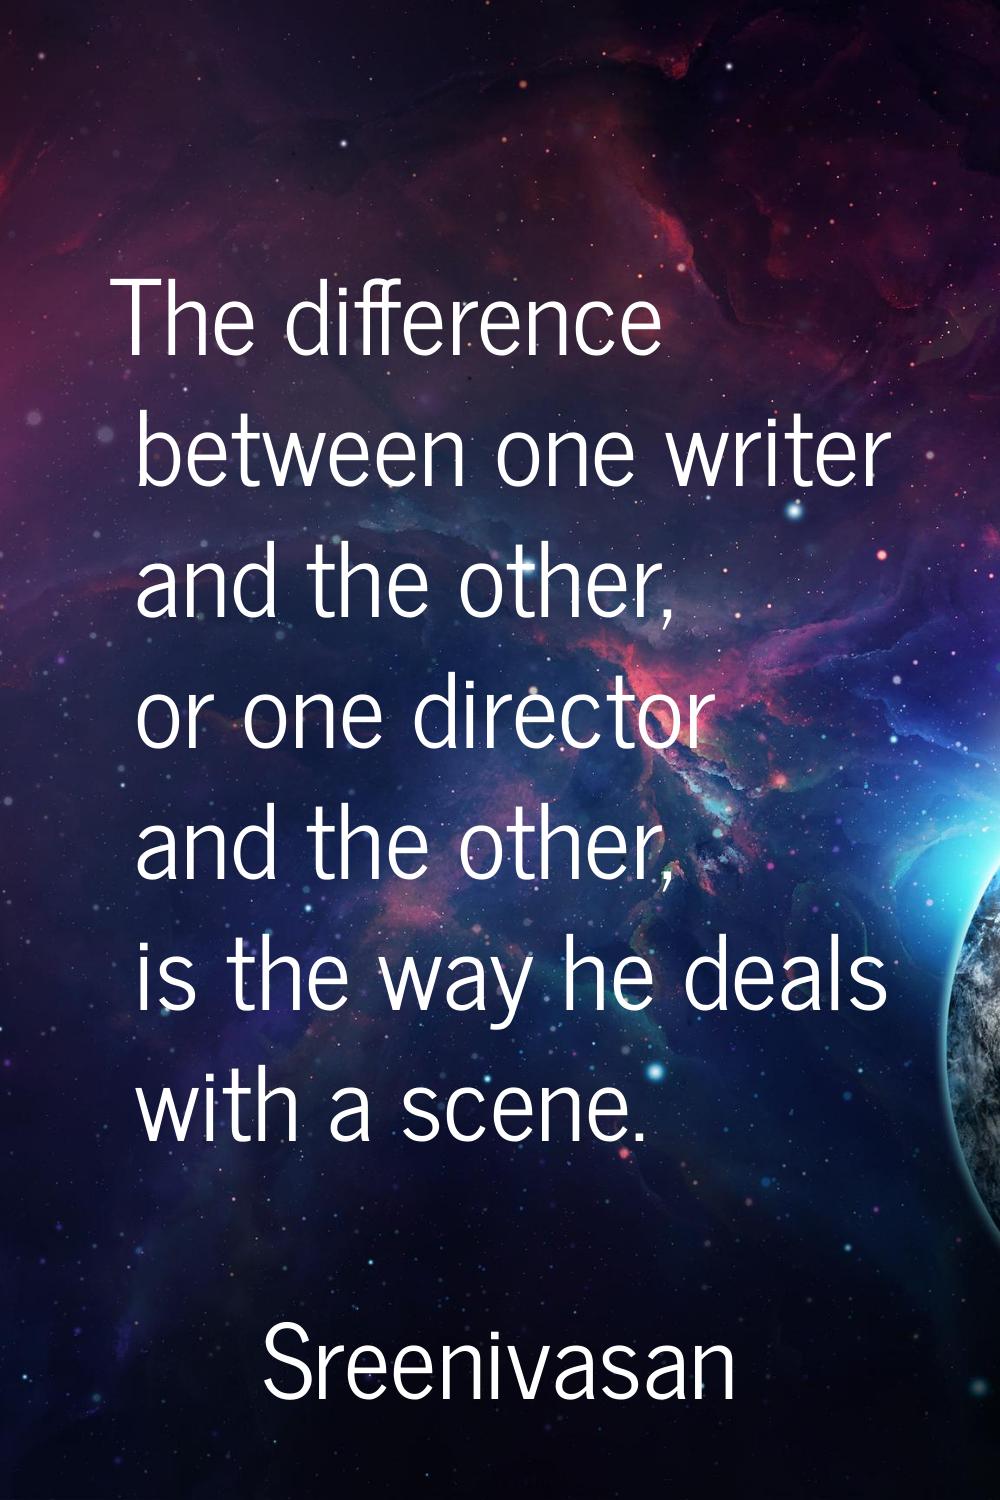 The difference between one writer and the other, or one director and the other, is the way he deals